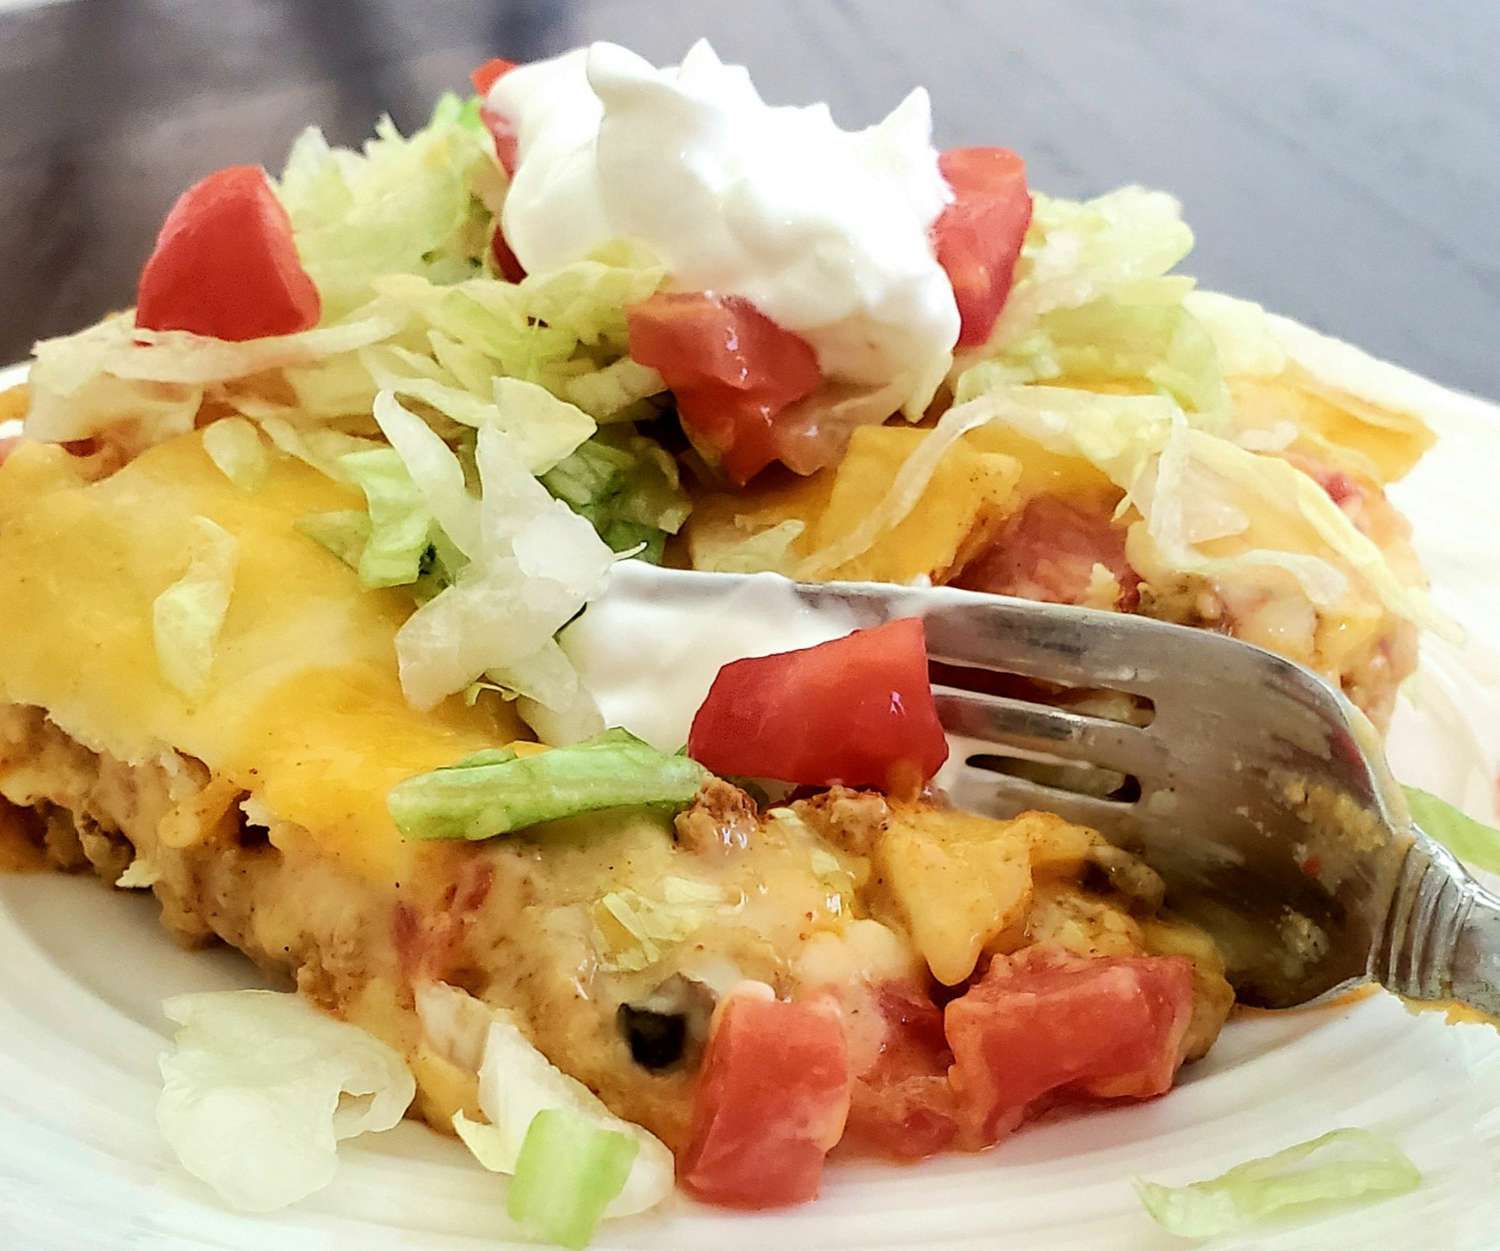 enchiladas with cheese, lettuce, tomato, and sour cream topping